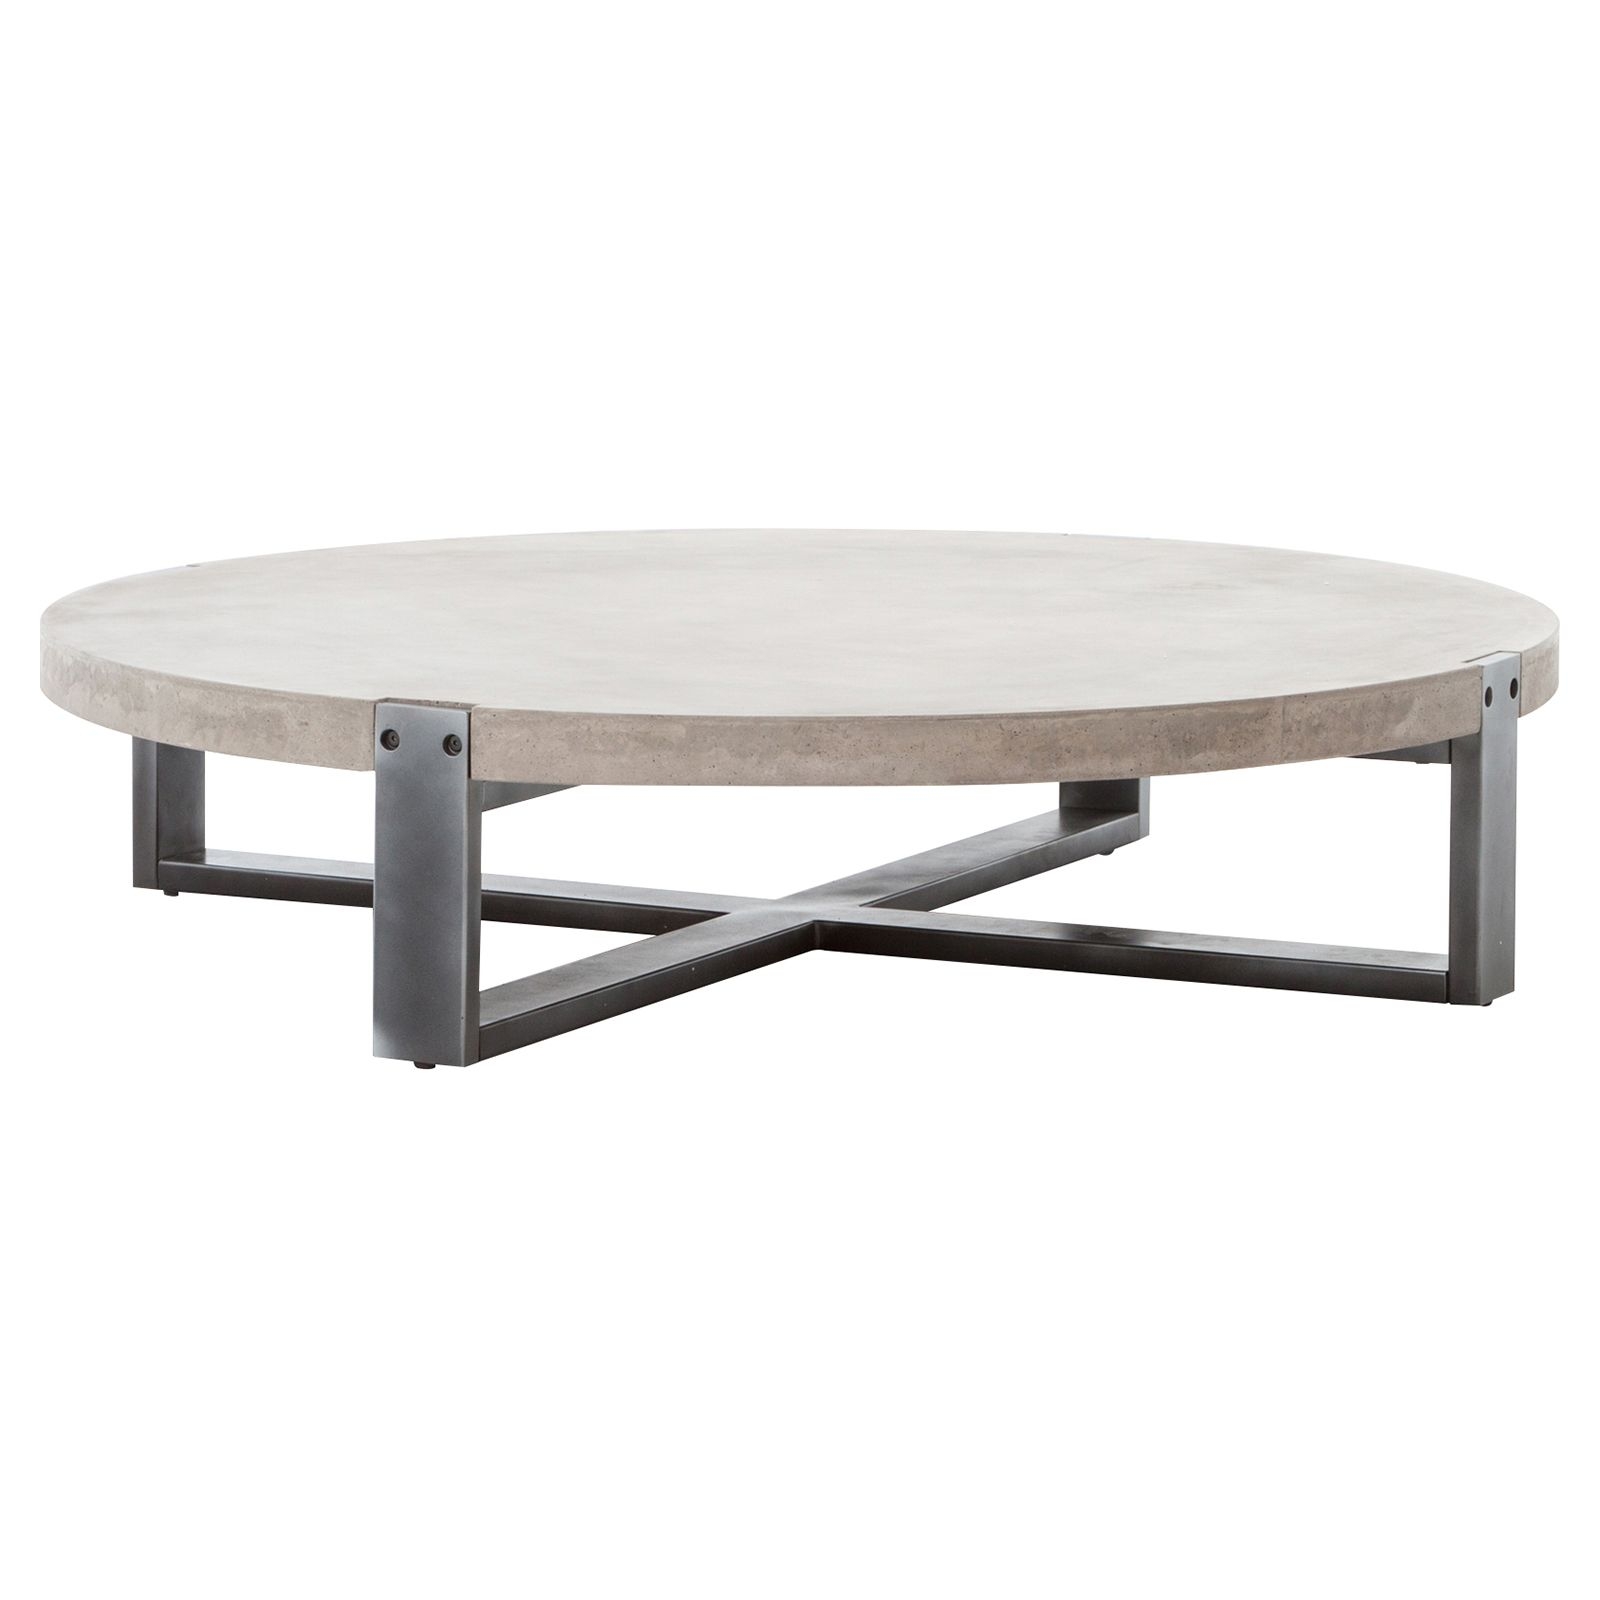 Low Coffee Table You Ll Love In 2021 Visualhunt